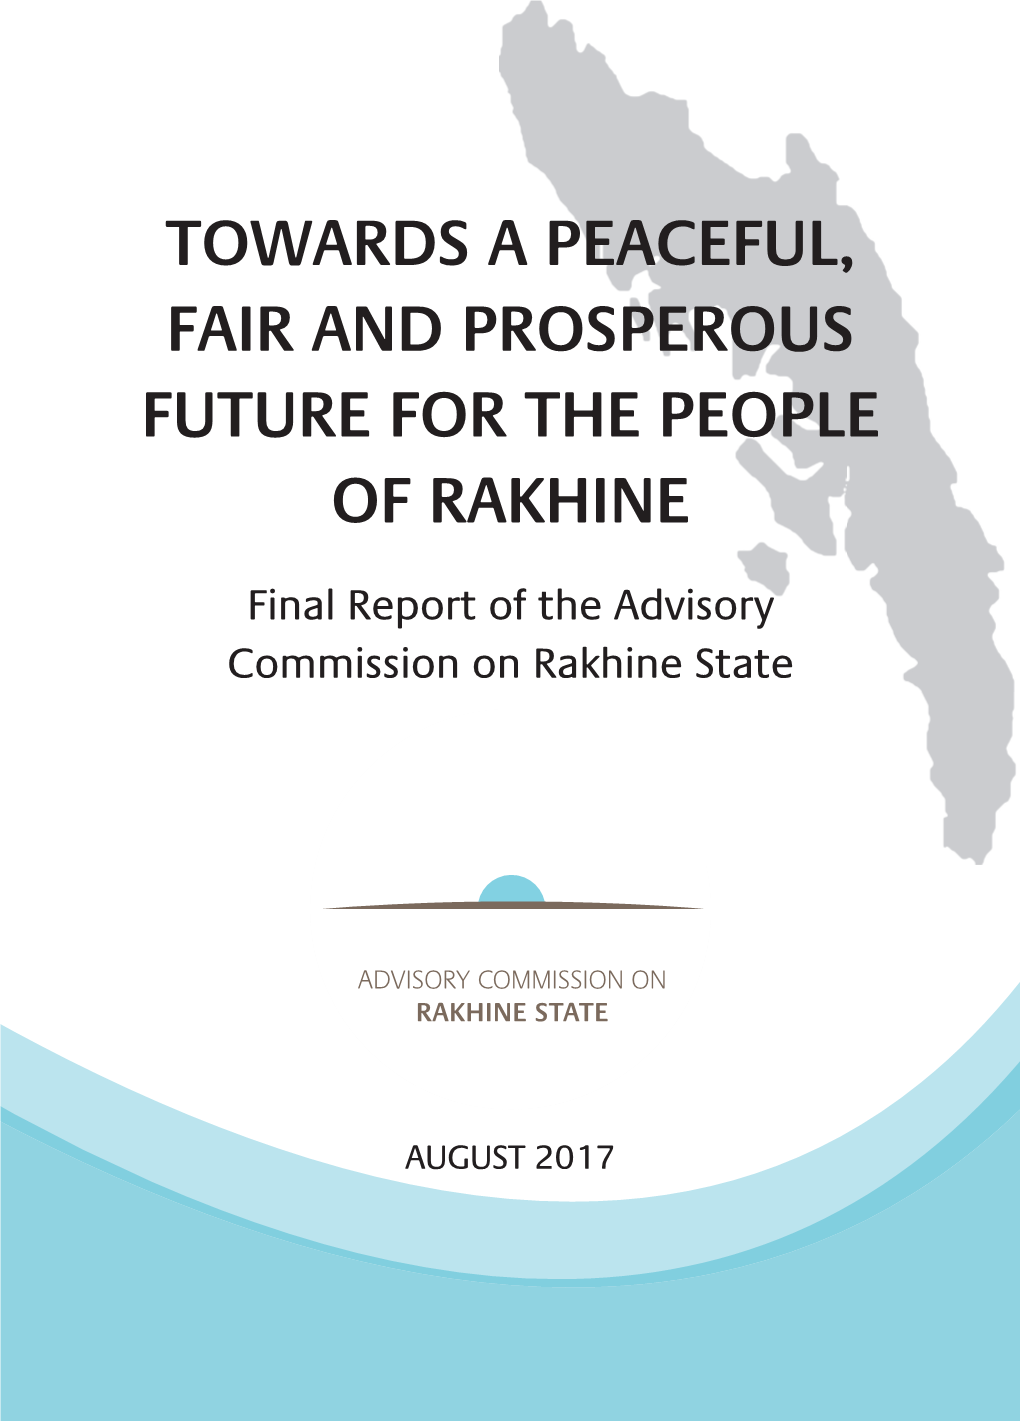 Final Report of the Advisory Commission on Rakhine State